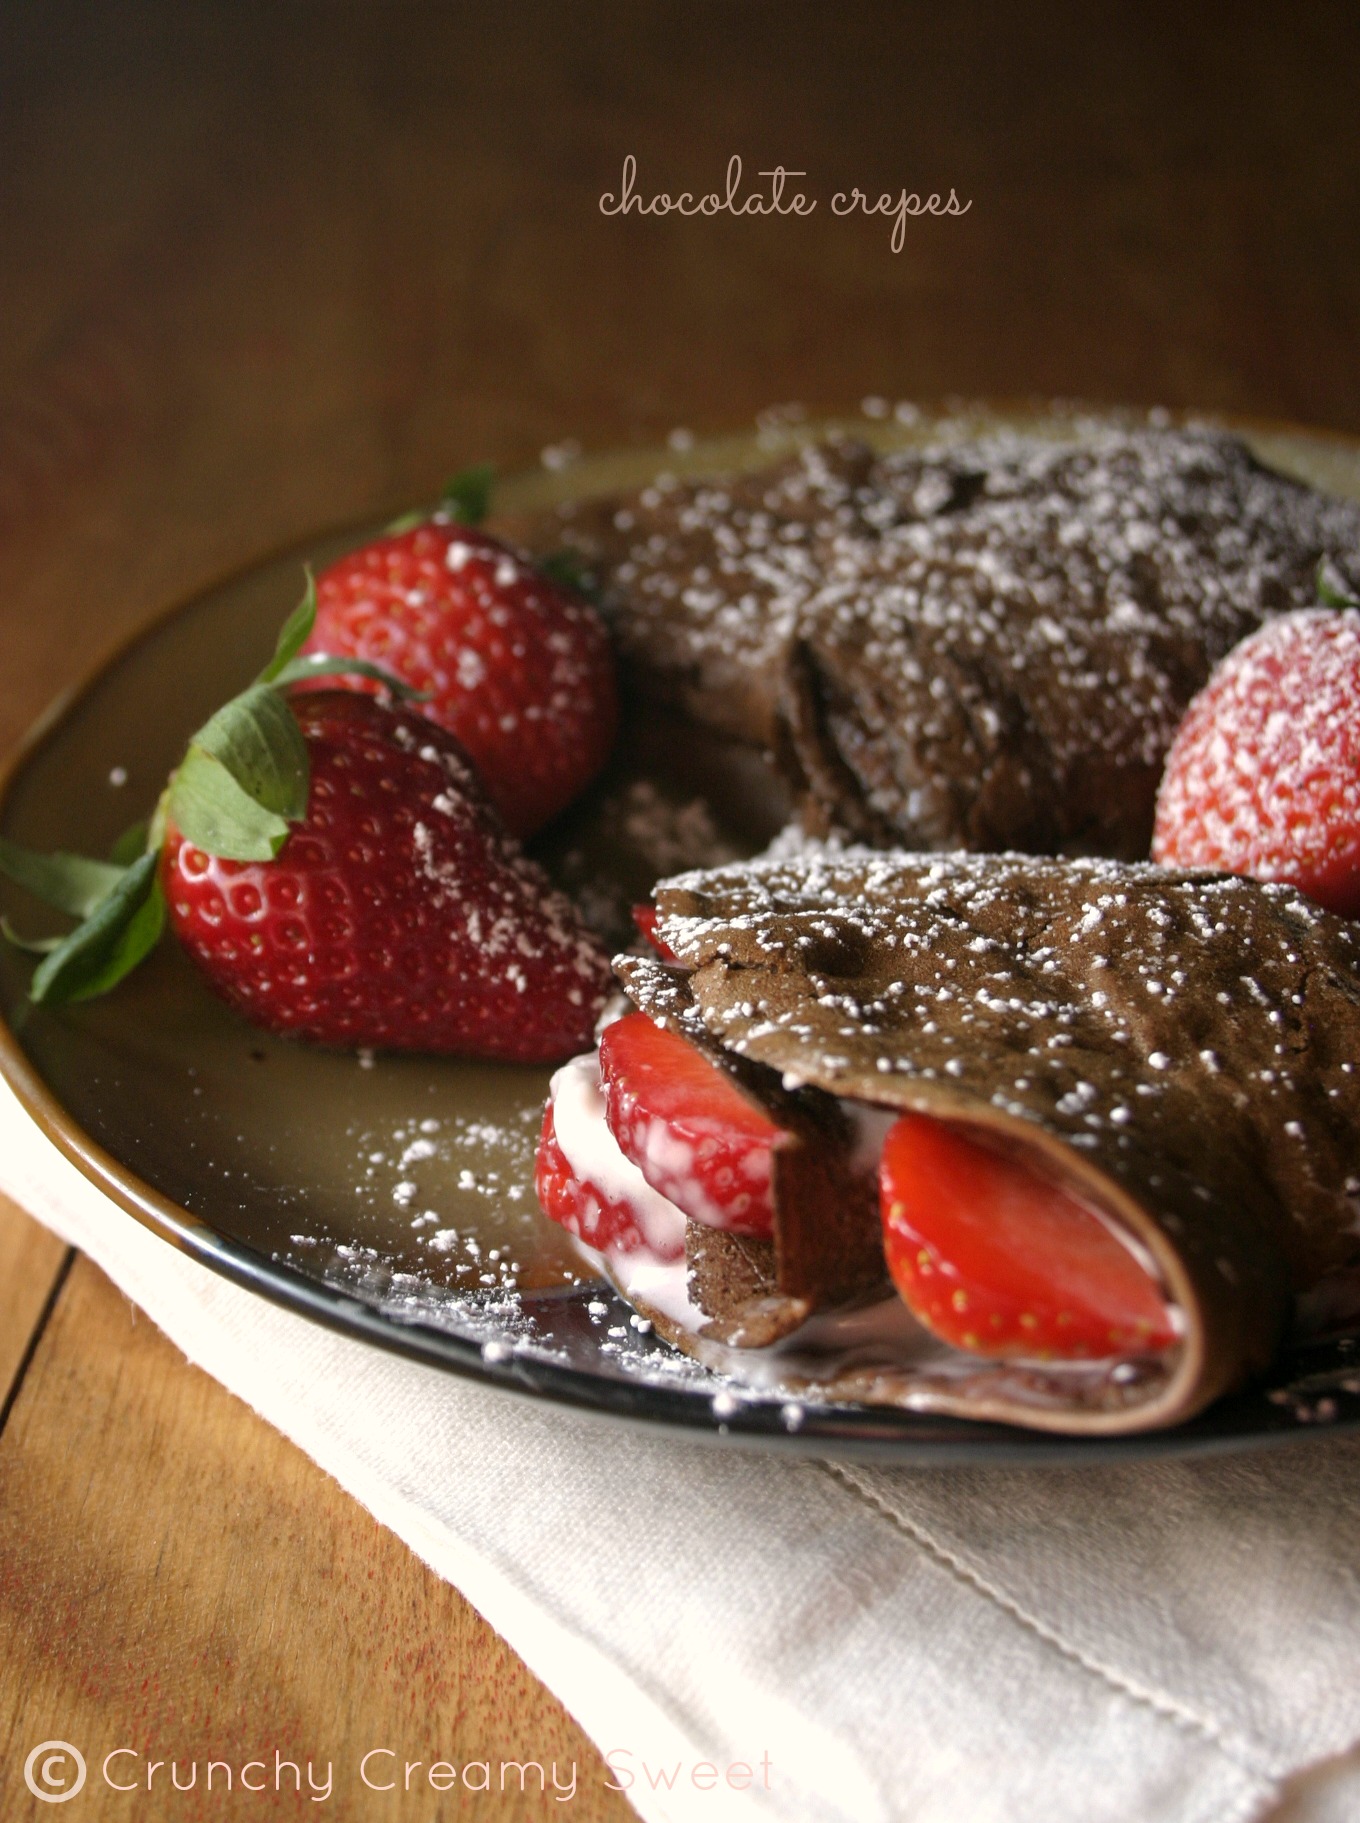 Chocolate crepes strawberries and cream filling